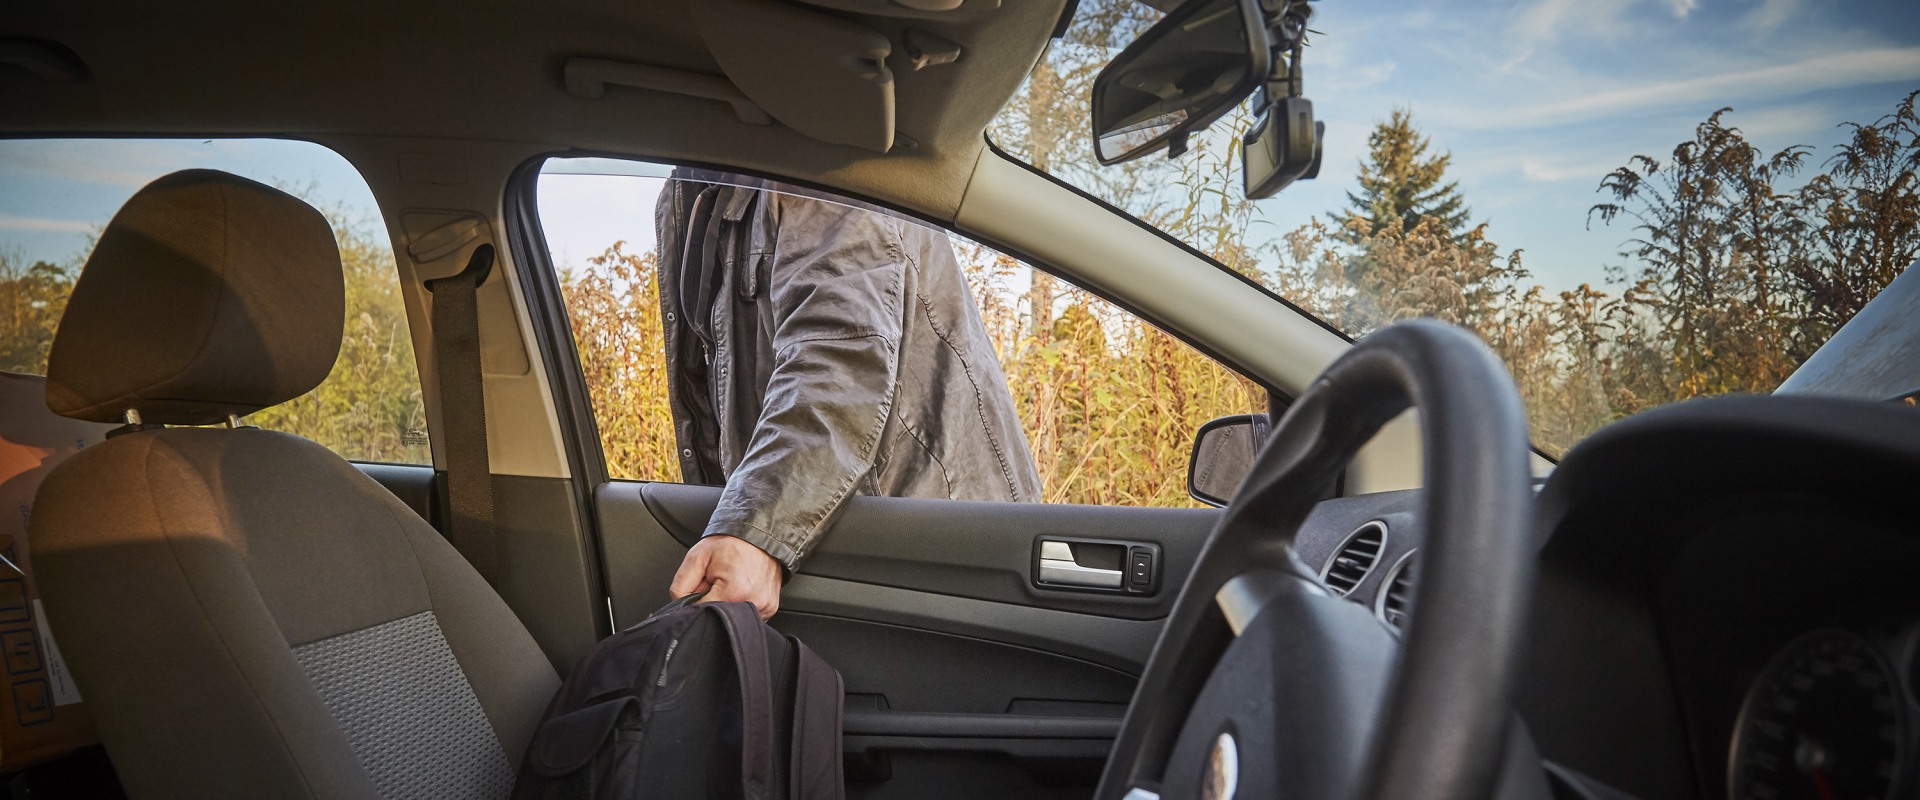 What Does Car Insurance Cover in the Event of Theft?